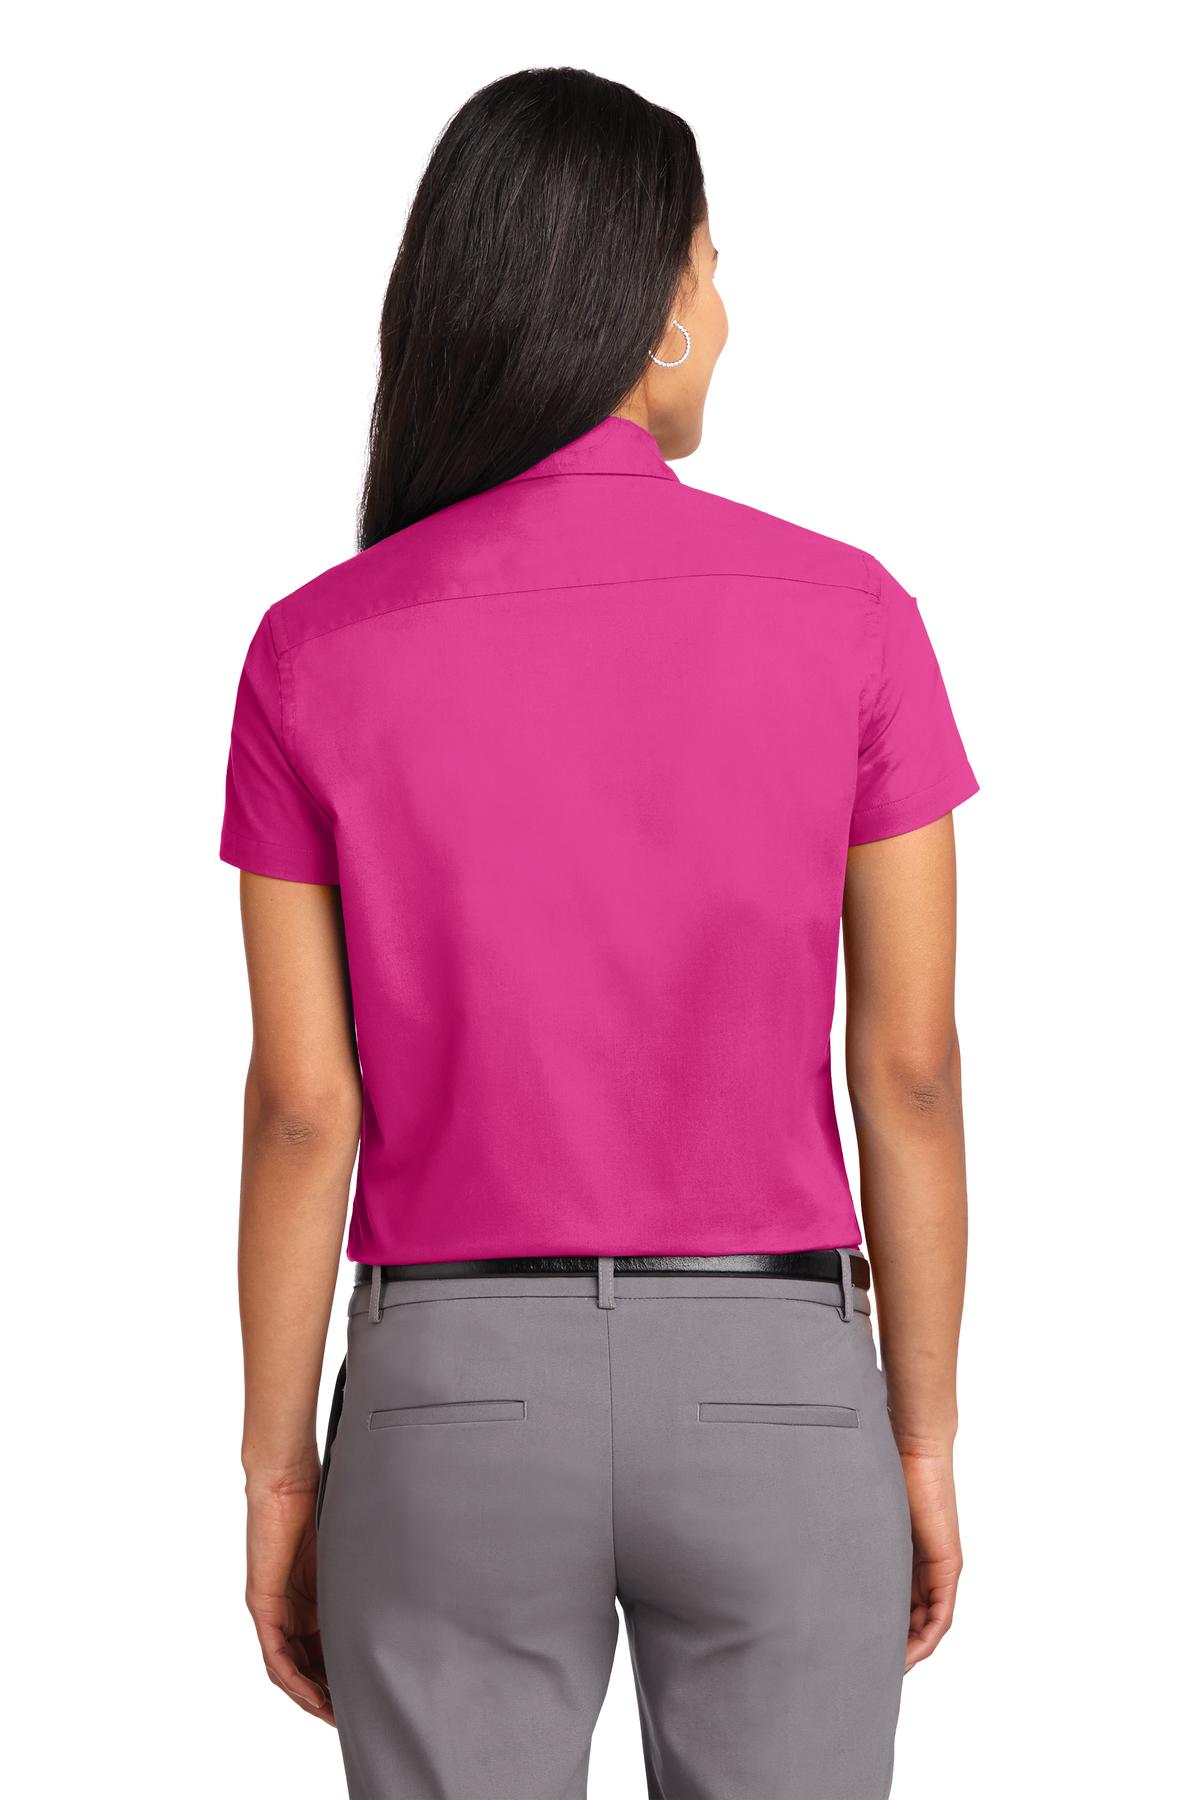 Port Authority Ladies Short Sleeve Easy Care Shirt, Product